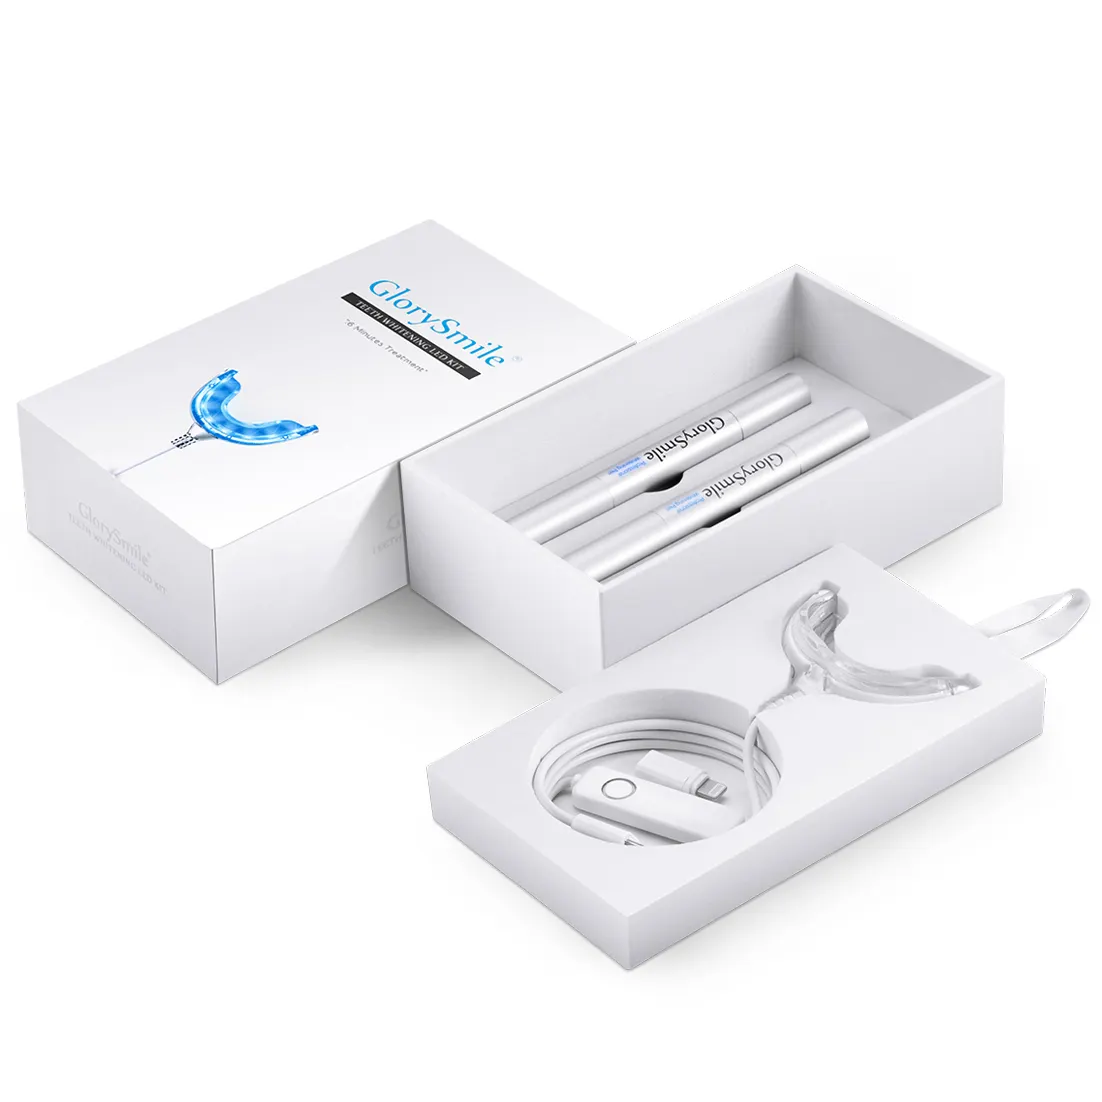 CE Approved 16 Minutes Smart Led Light Dental Bleaching Lamp Teeth Whitening Kit Private Label